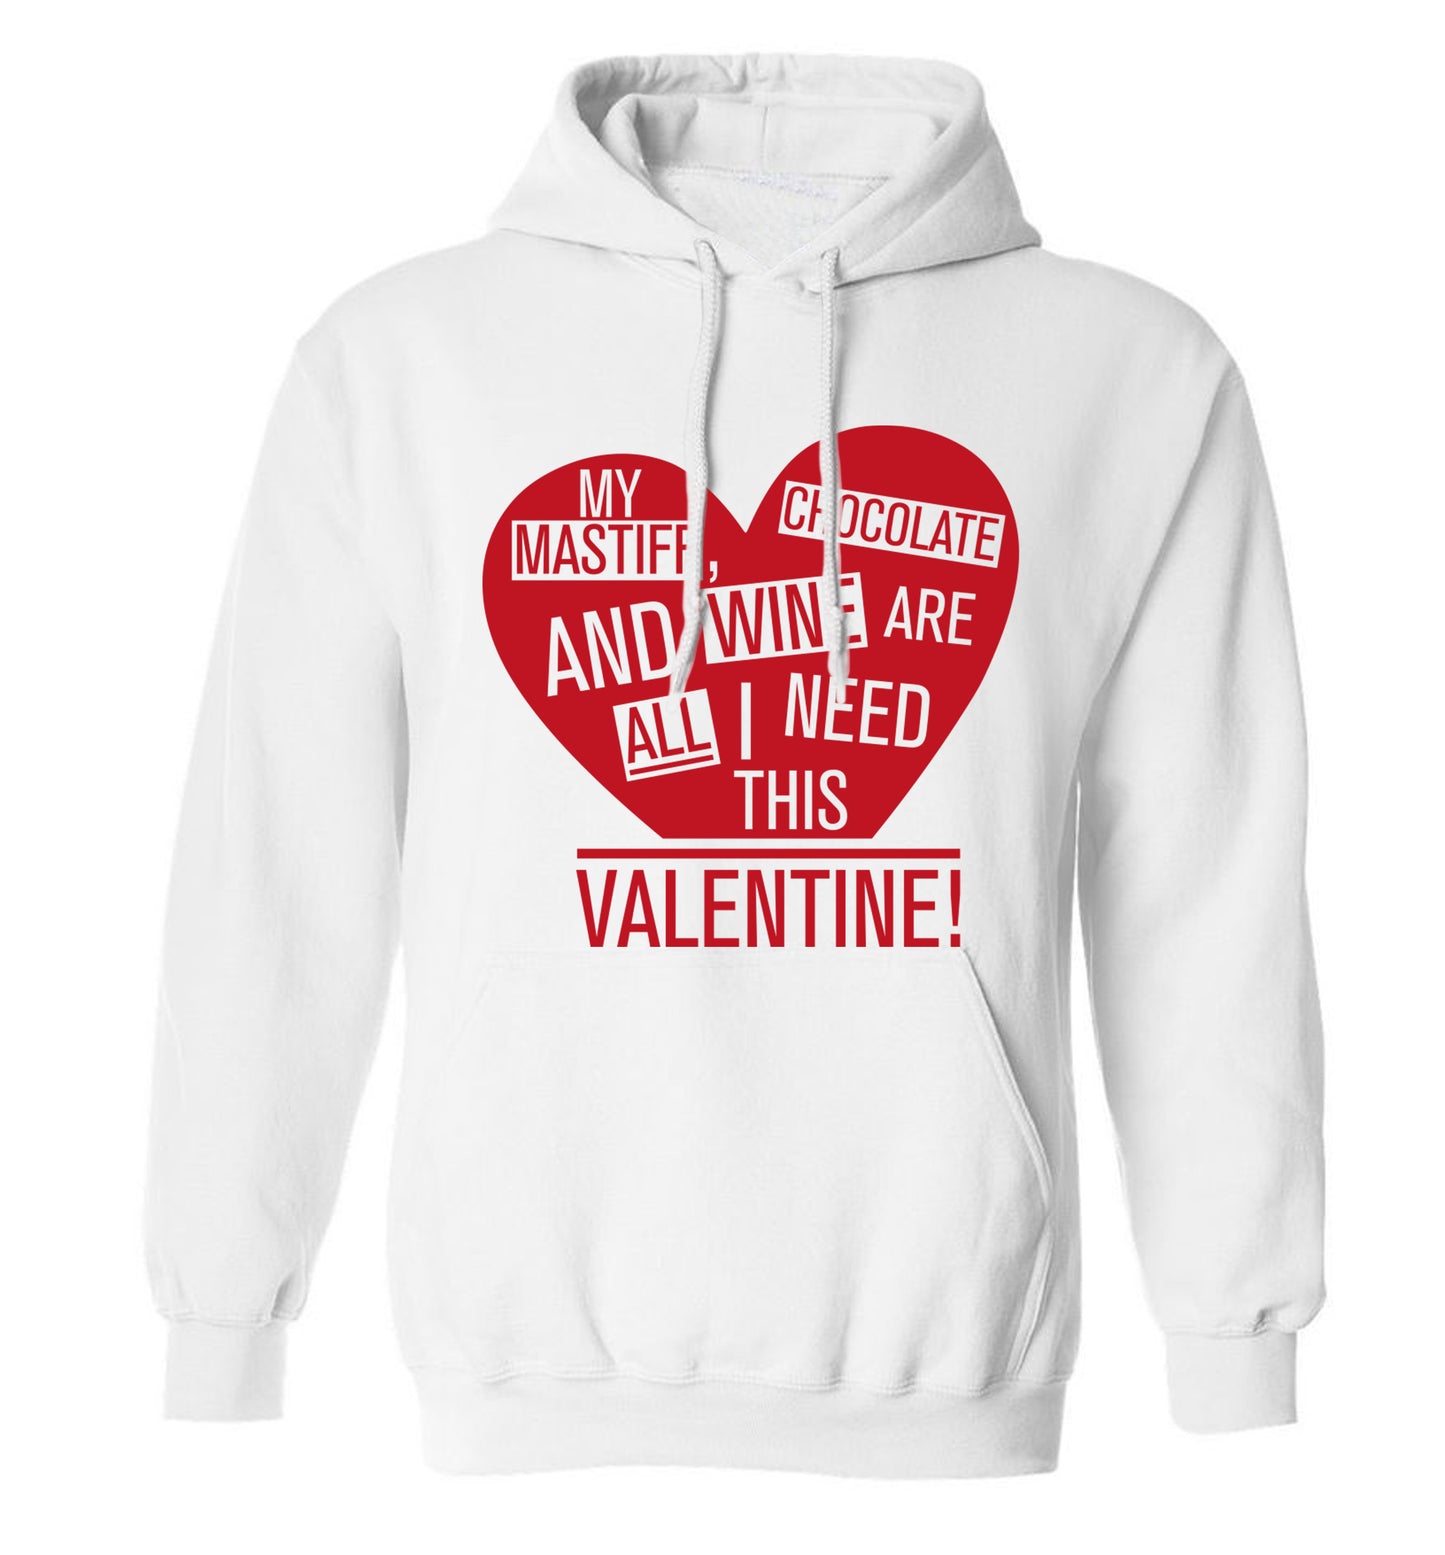 My mastiff, chocolate and wine are all I need this valentine! adults unisex white hoodie 2XL